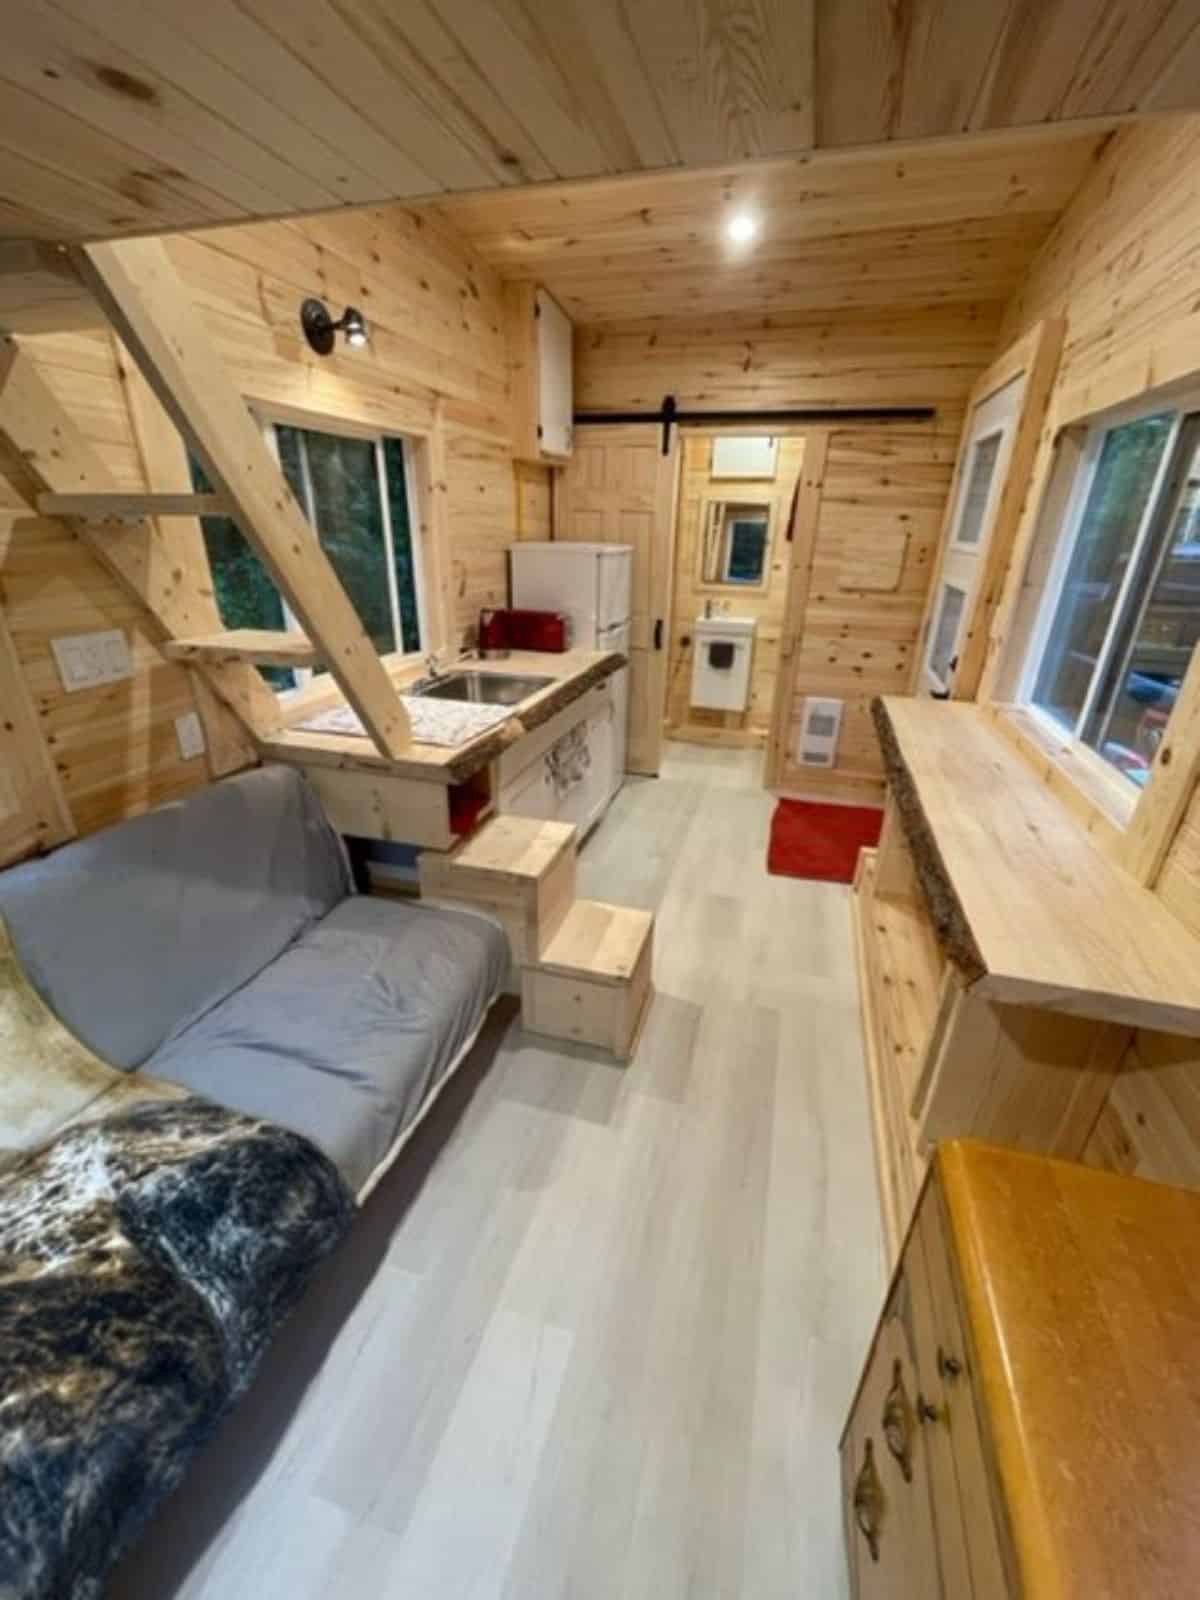 Living area of This Elegant Tiny Home has a couch and entertainment unit